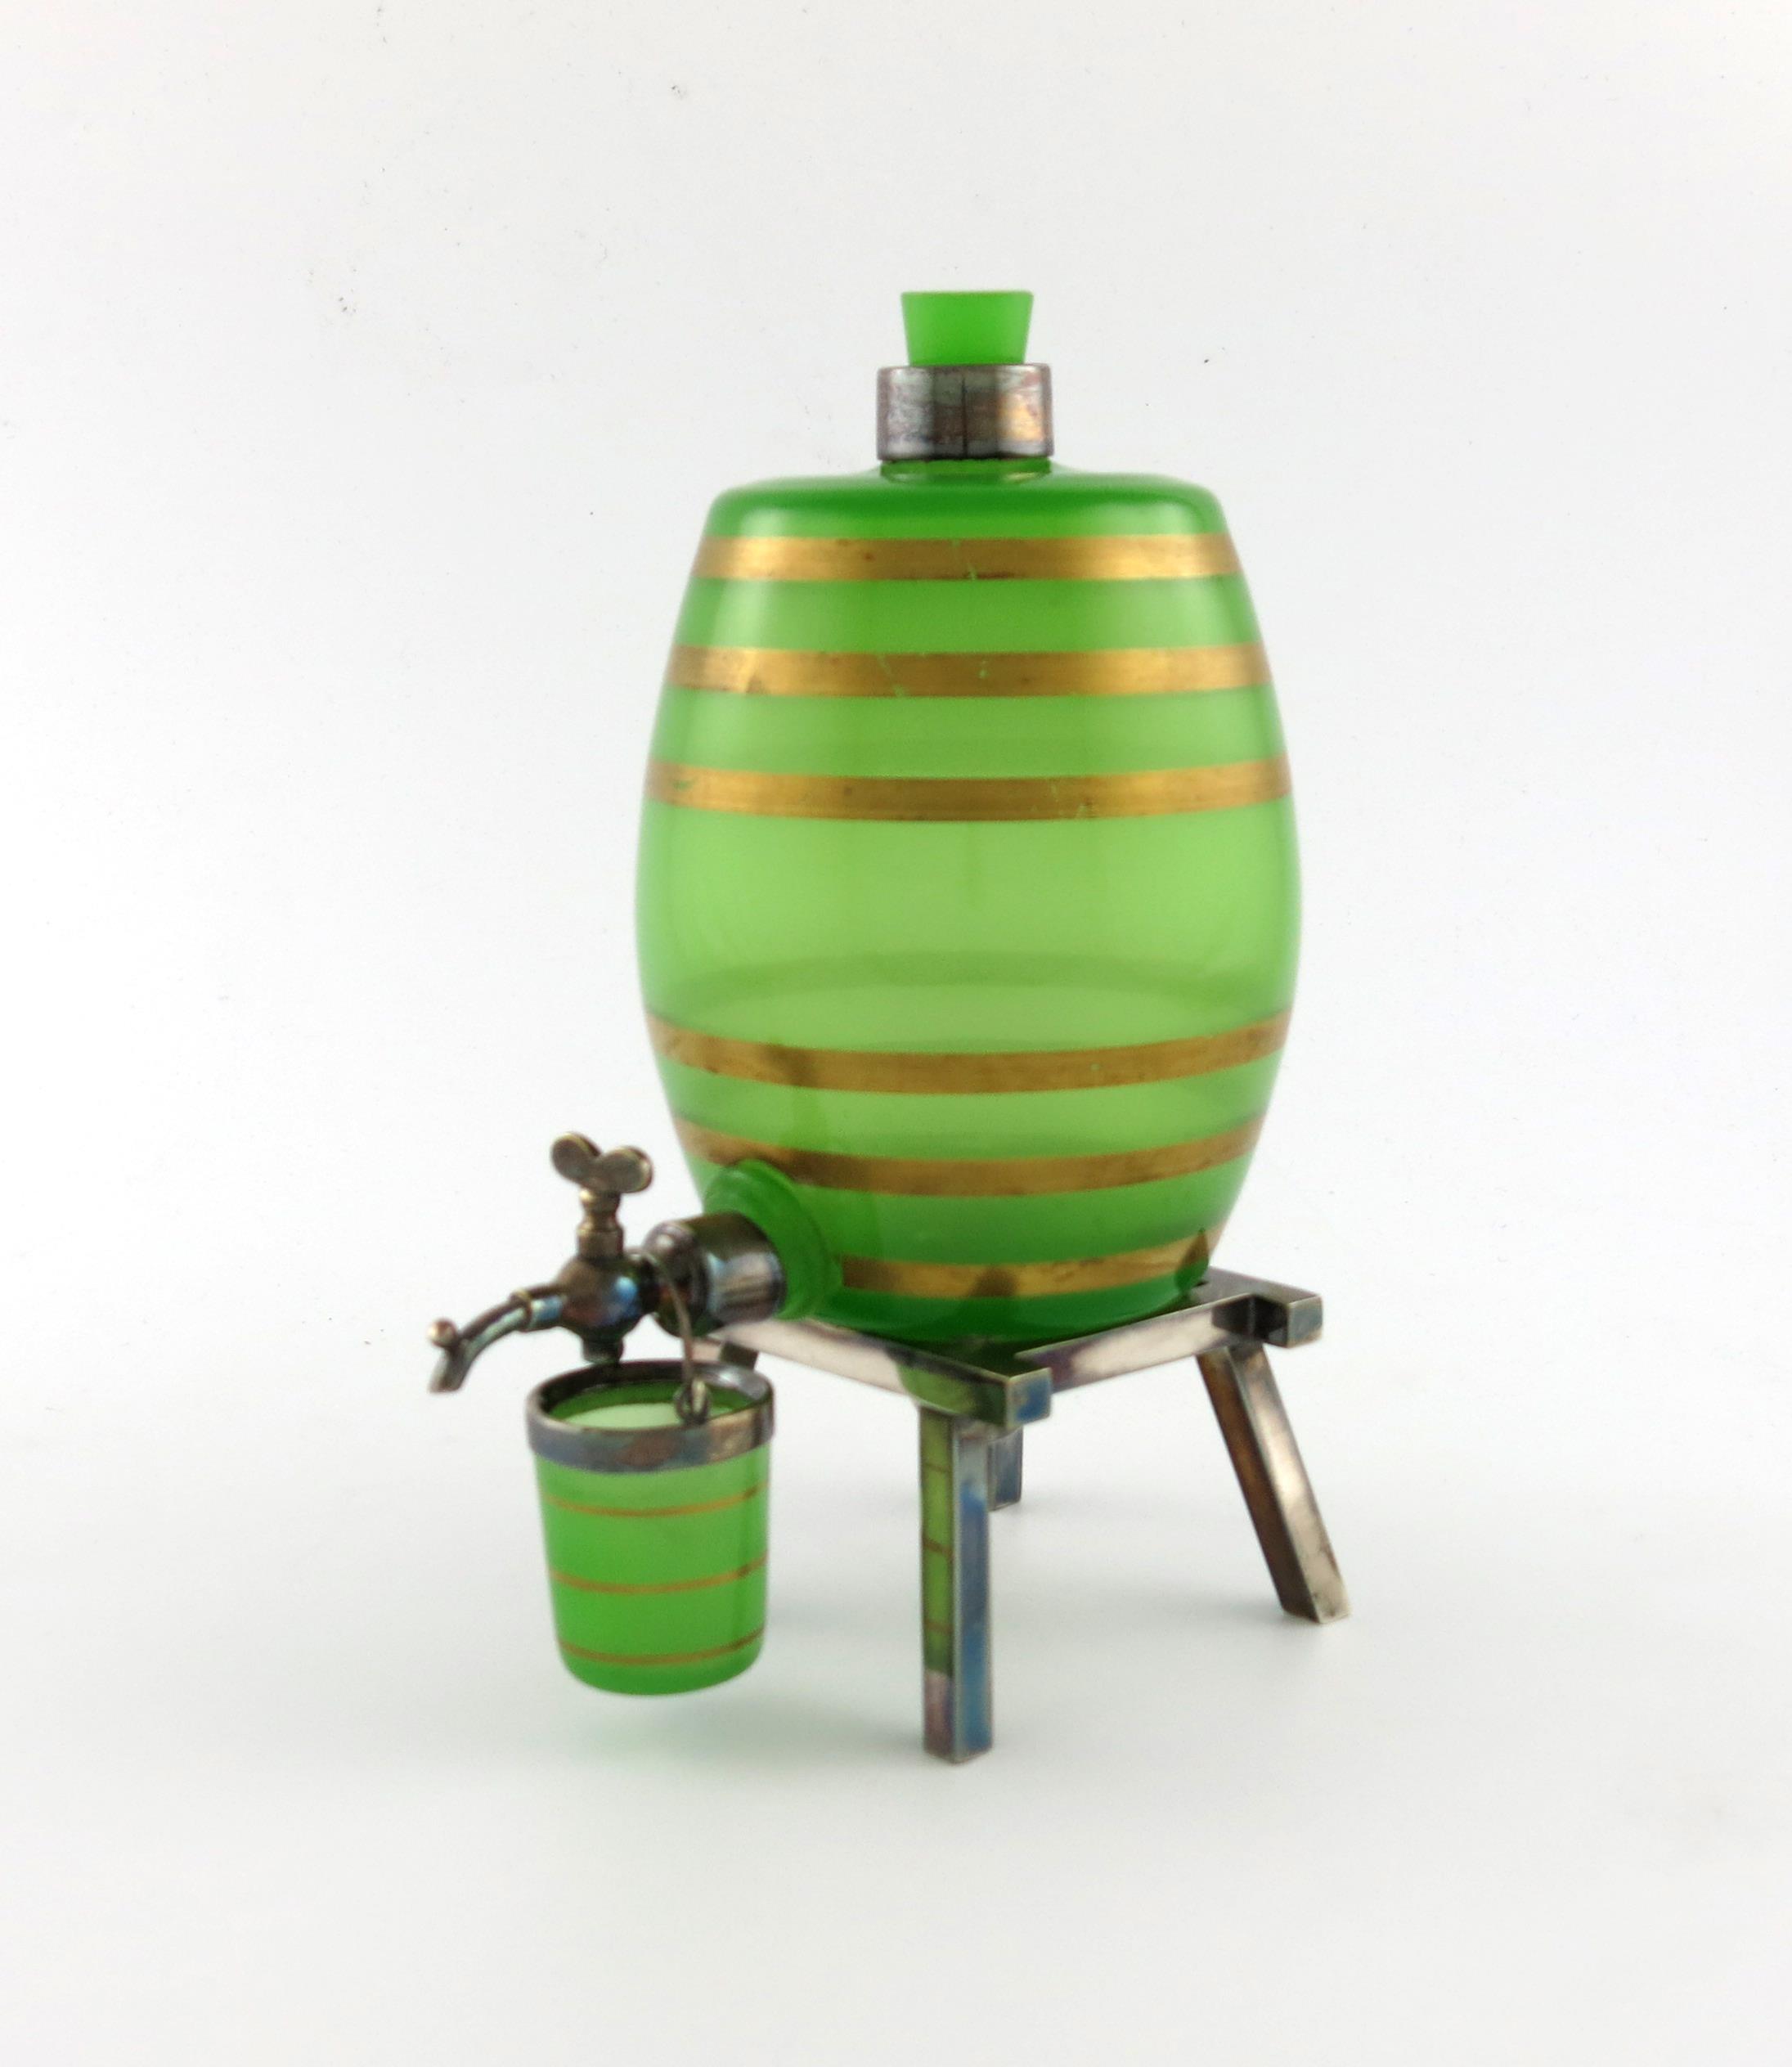 By Asprey and Co, and electroplated mounted green glass spirit barrel, the upright barrel with a